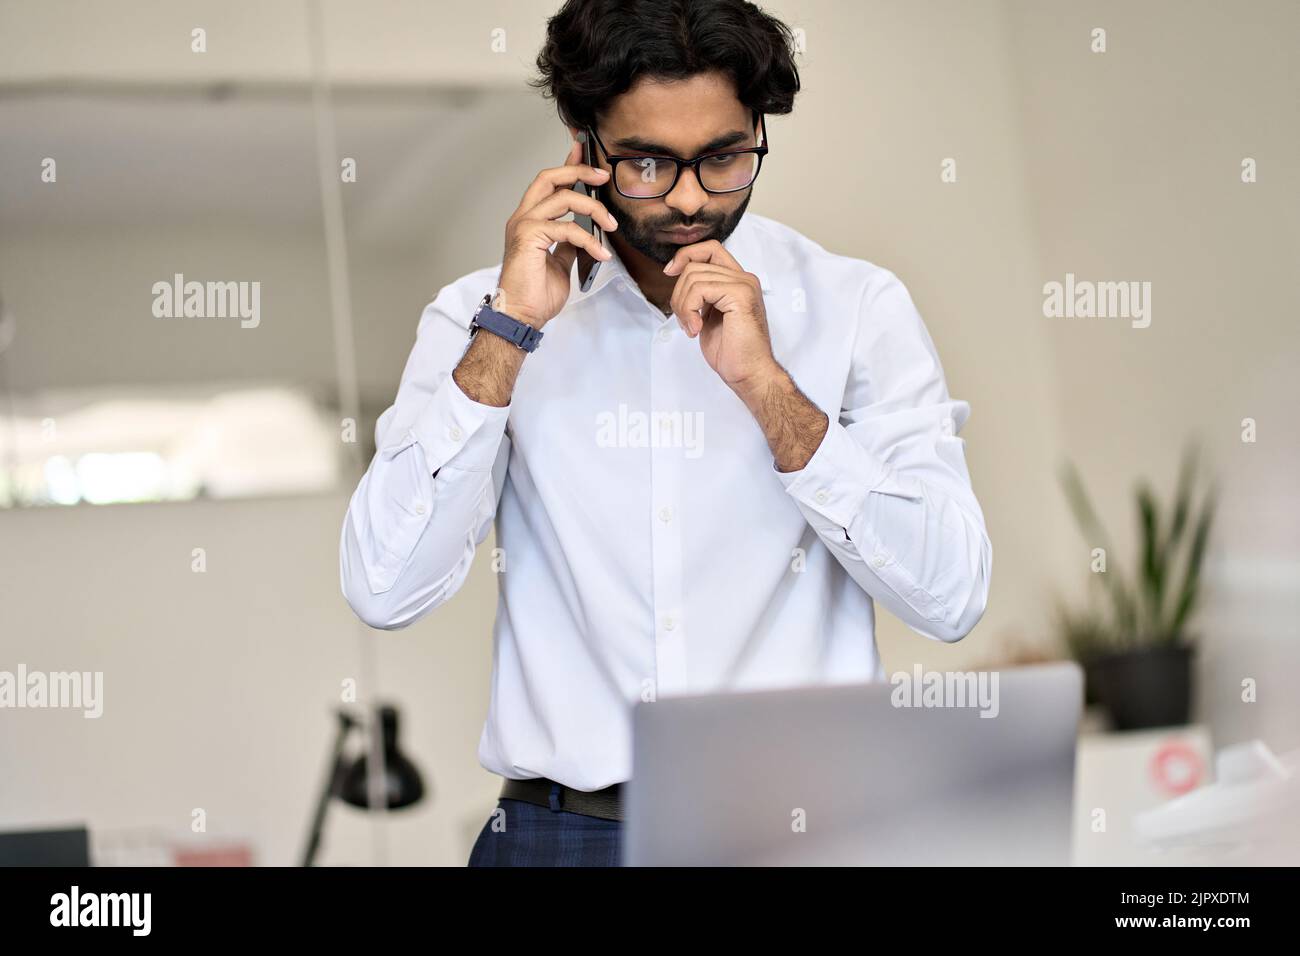 Busy indian business man talking on phone looking at laptop in office. Stock Photo